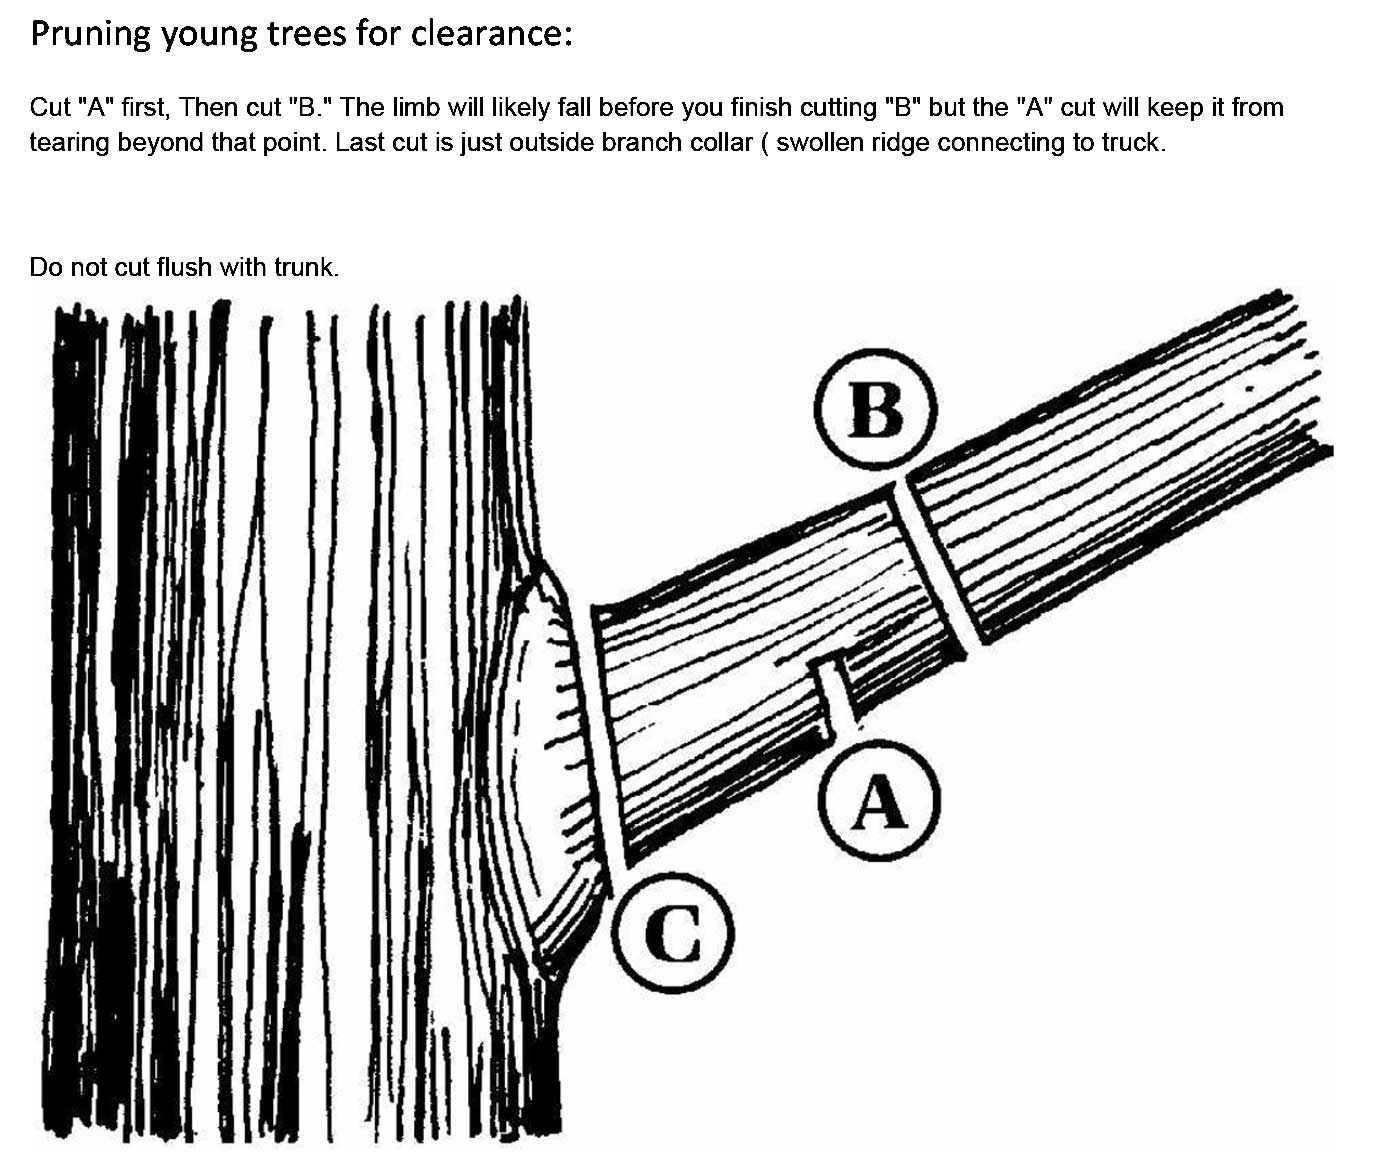 Denver's Office of the City Forester recommends this technique for pruning branches.